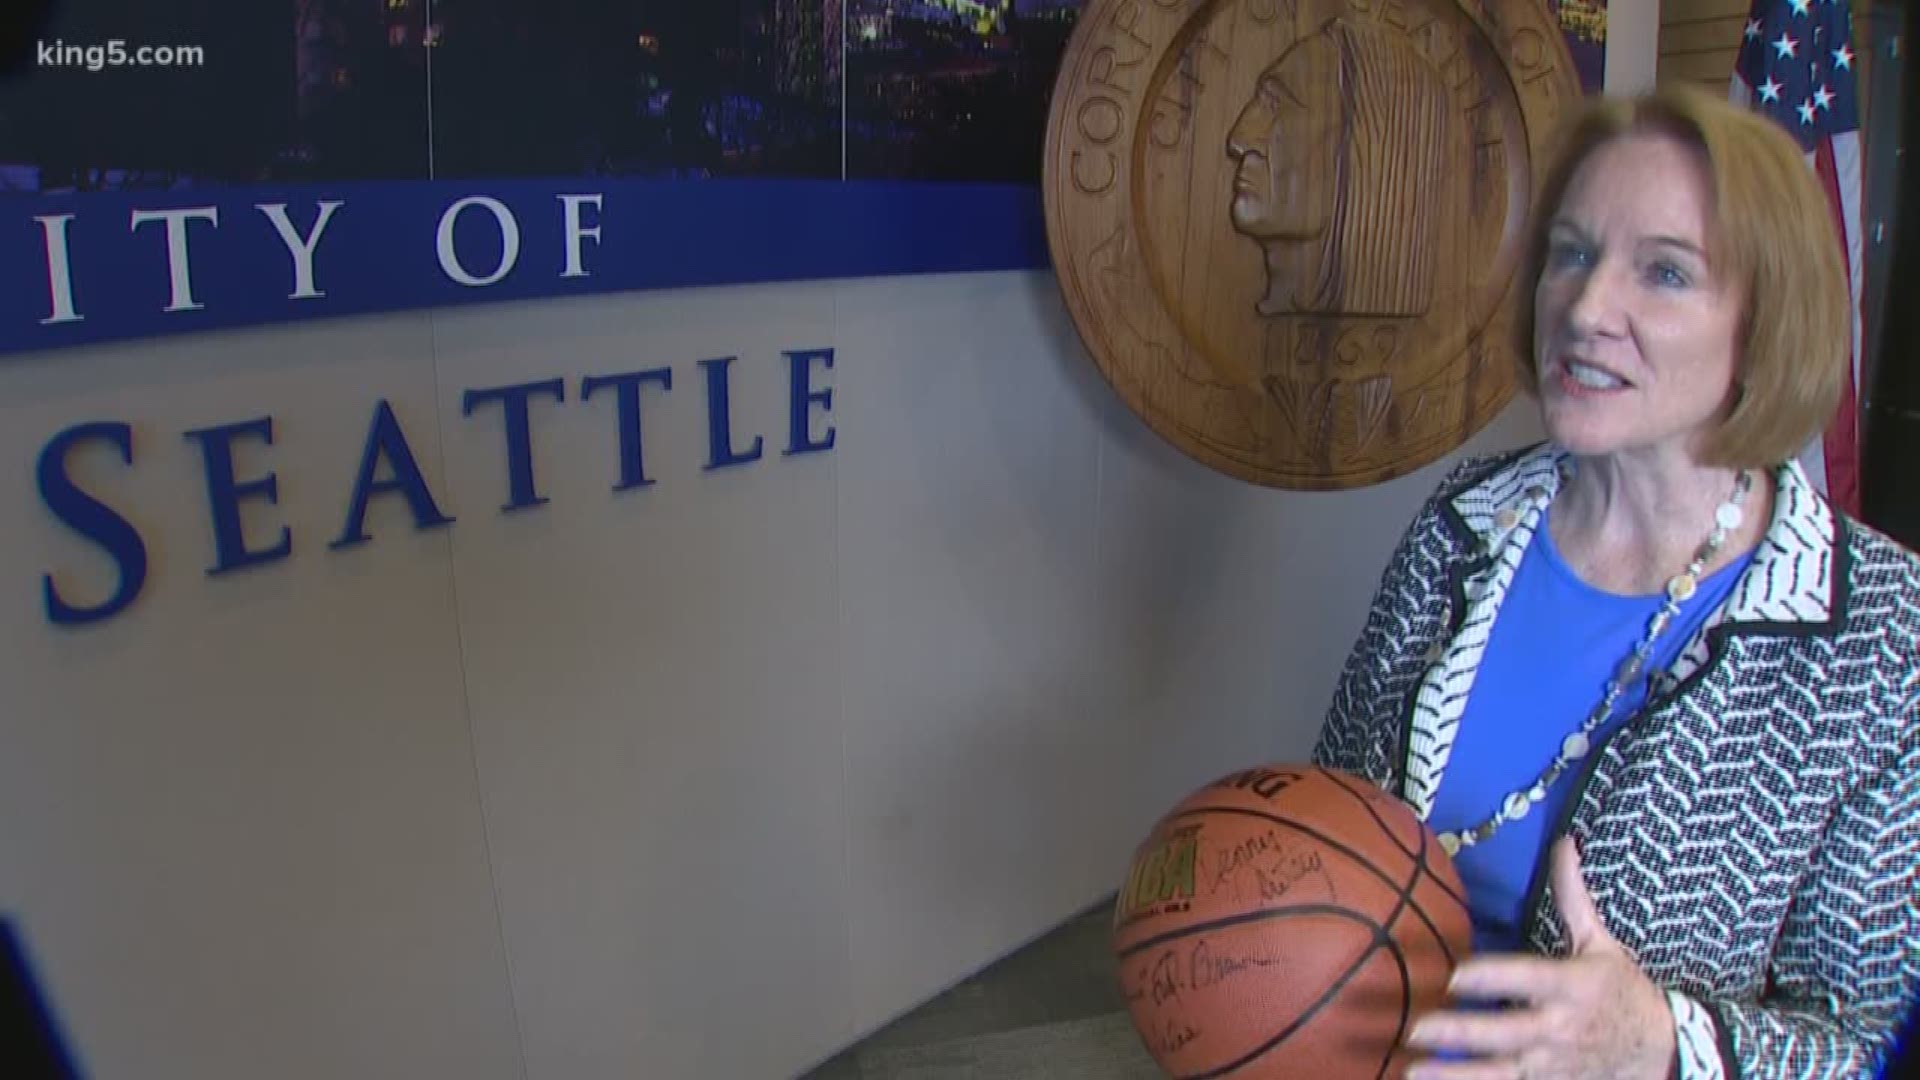 The NCAA tournament begins this week. Durkan picked both the men's and women's tournament winners last year. KING 5's Chris Daniels went back to the dry erase board to see if she could repeat the feat.